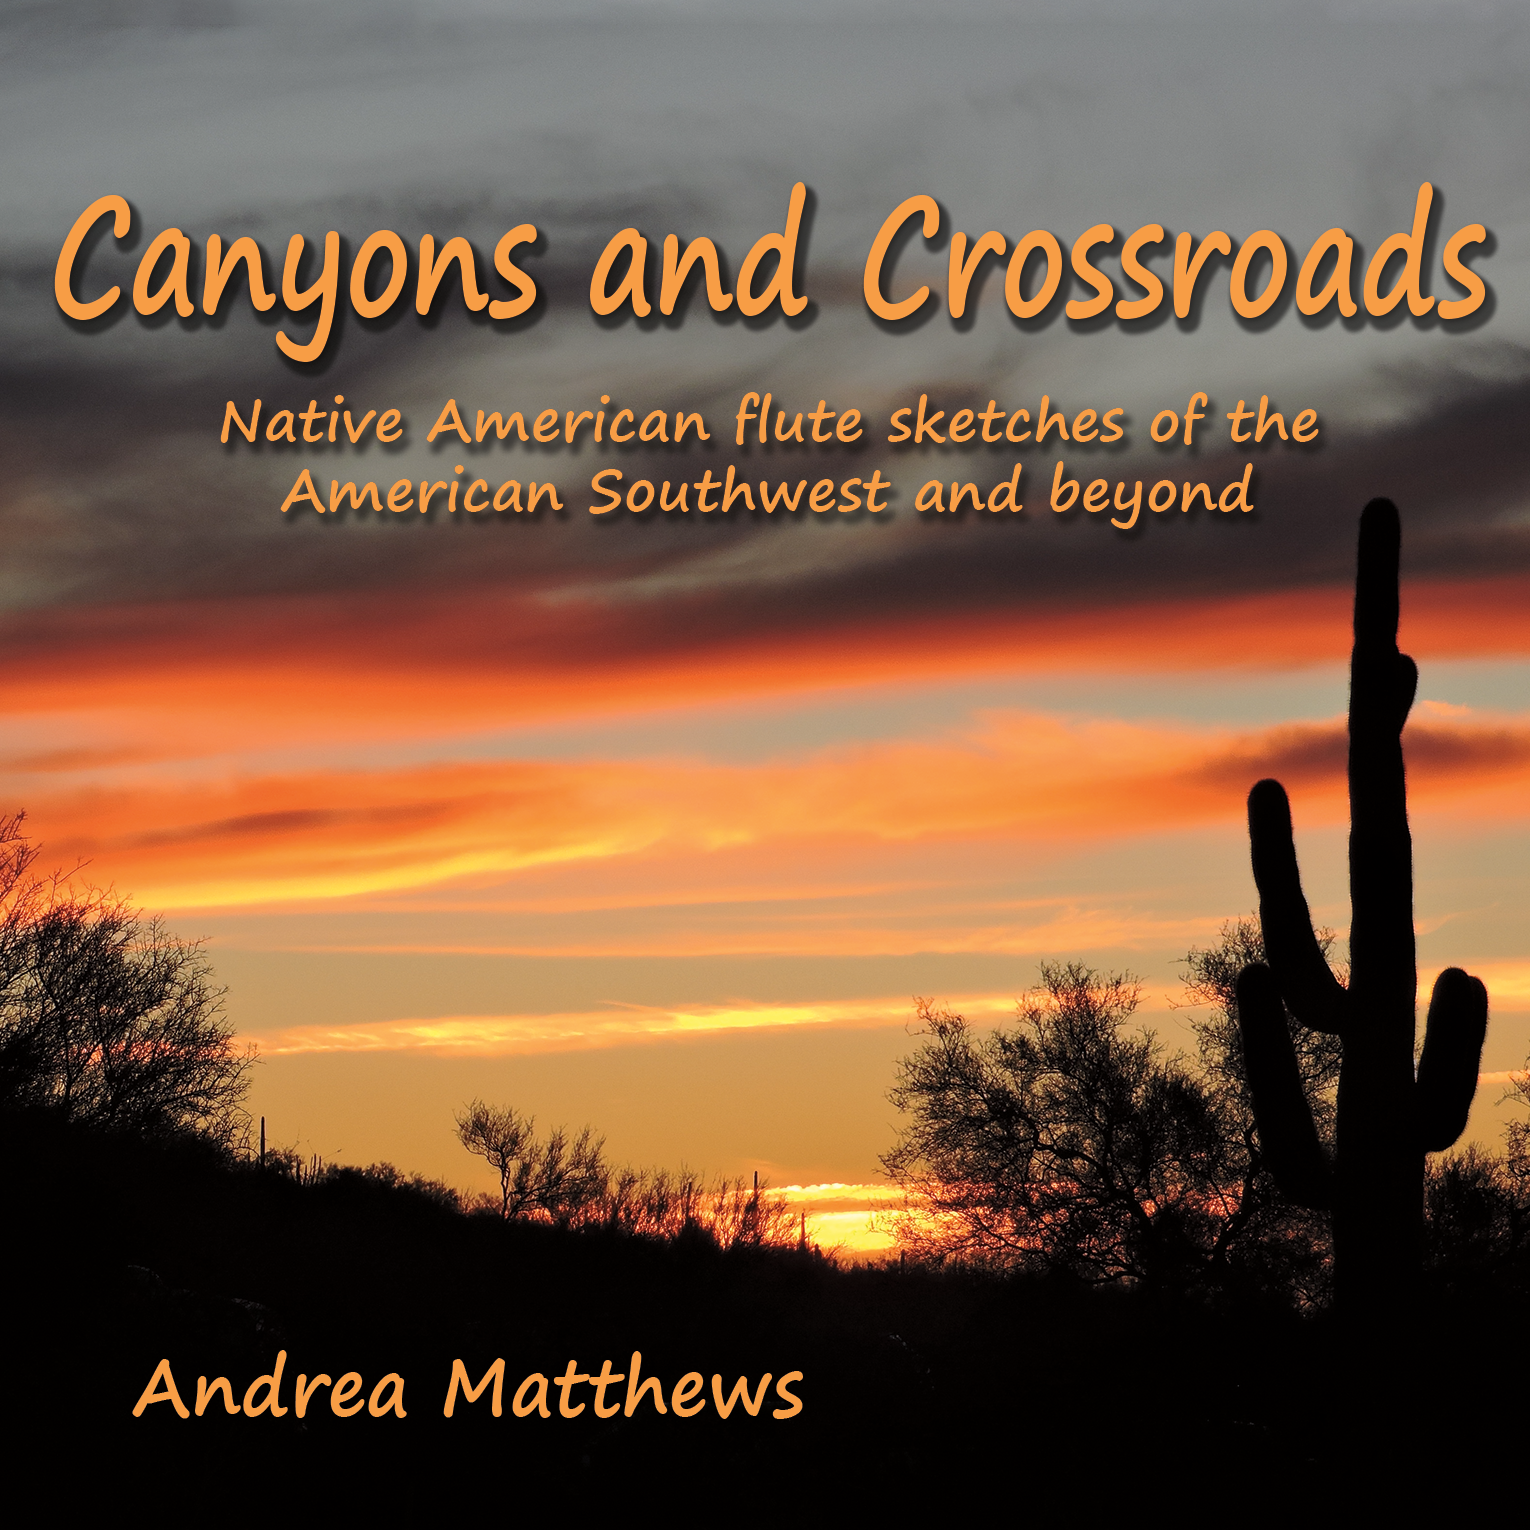 Canyons and Crossroads - Native American flute music CD